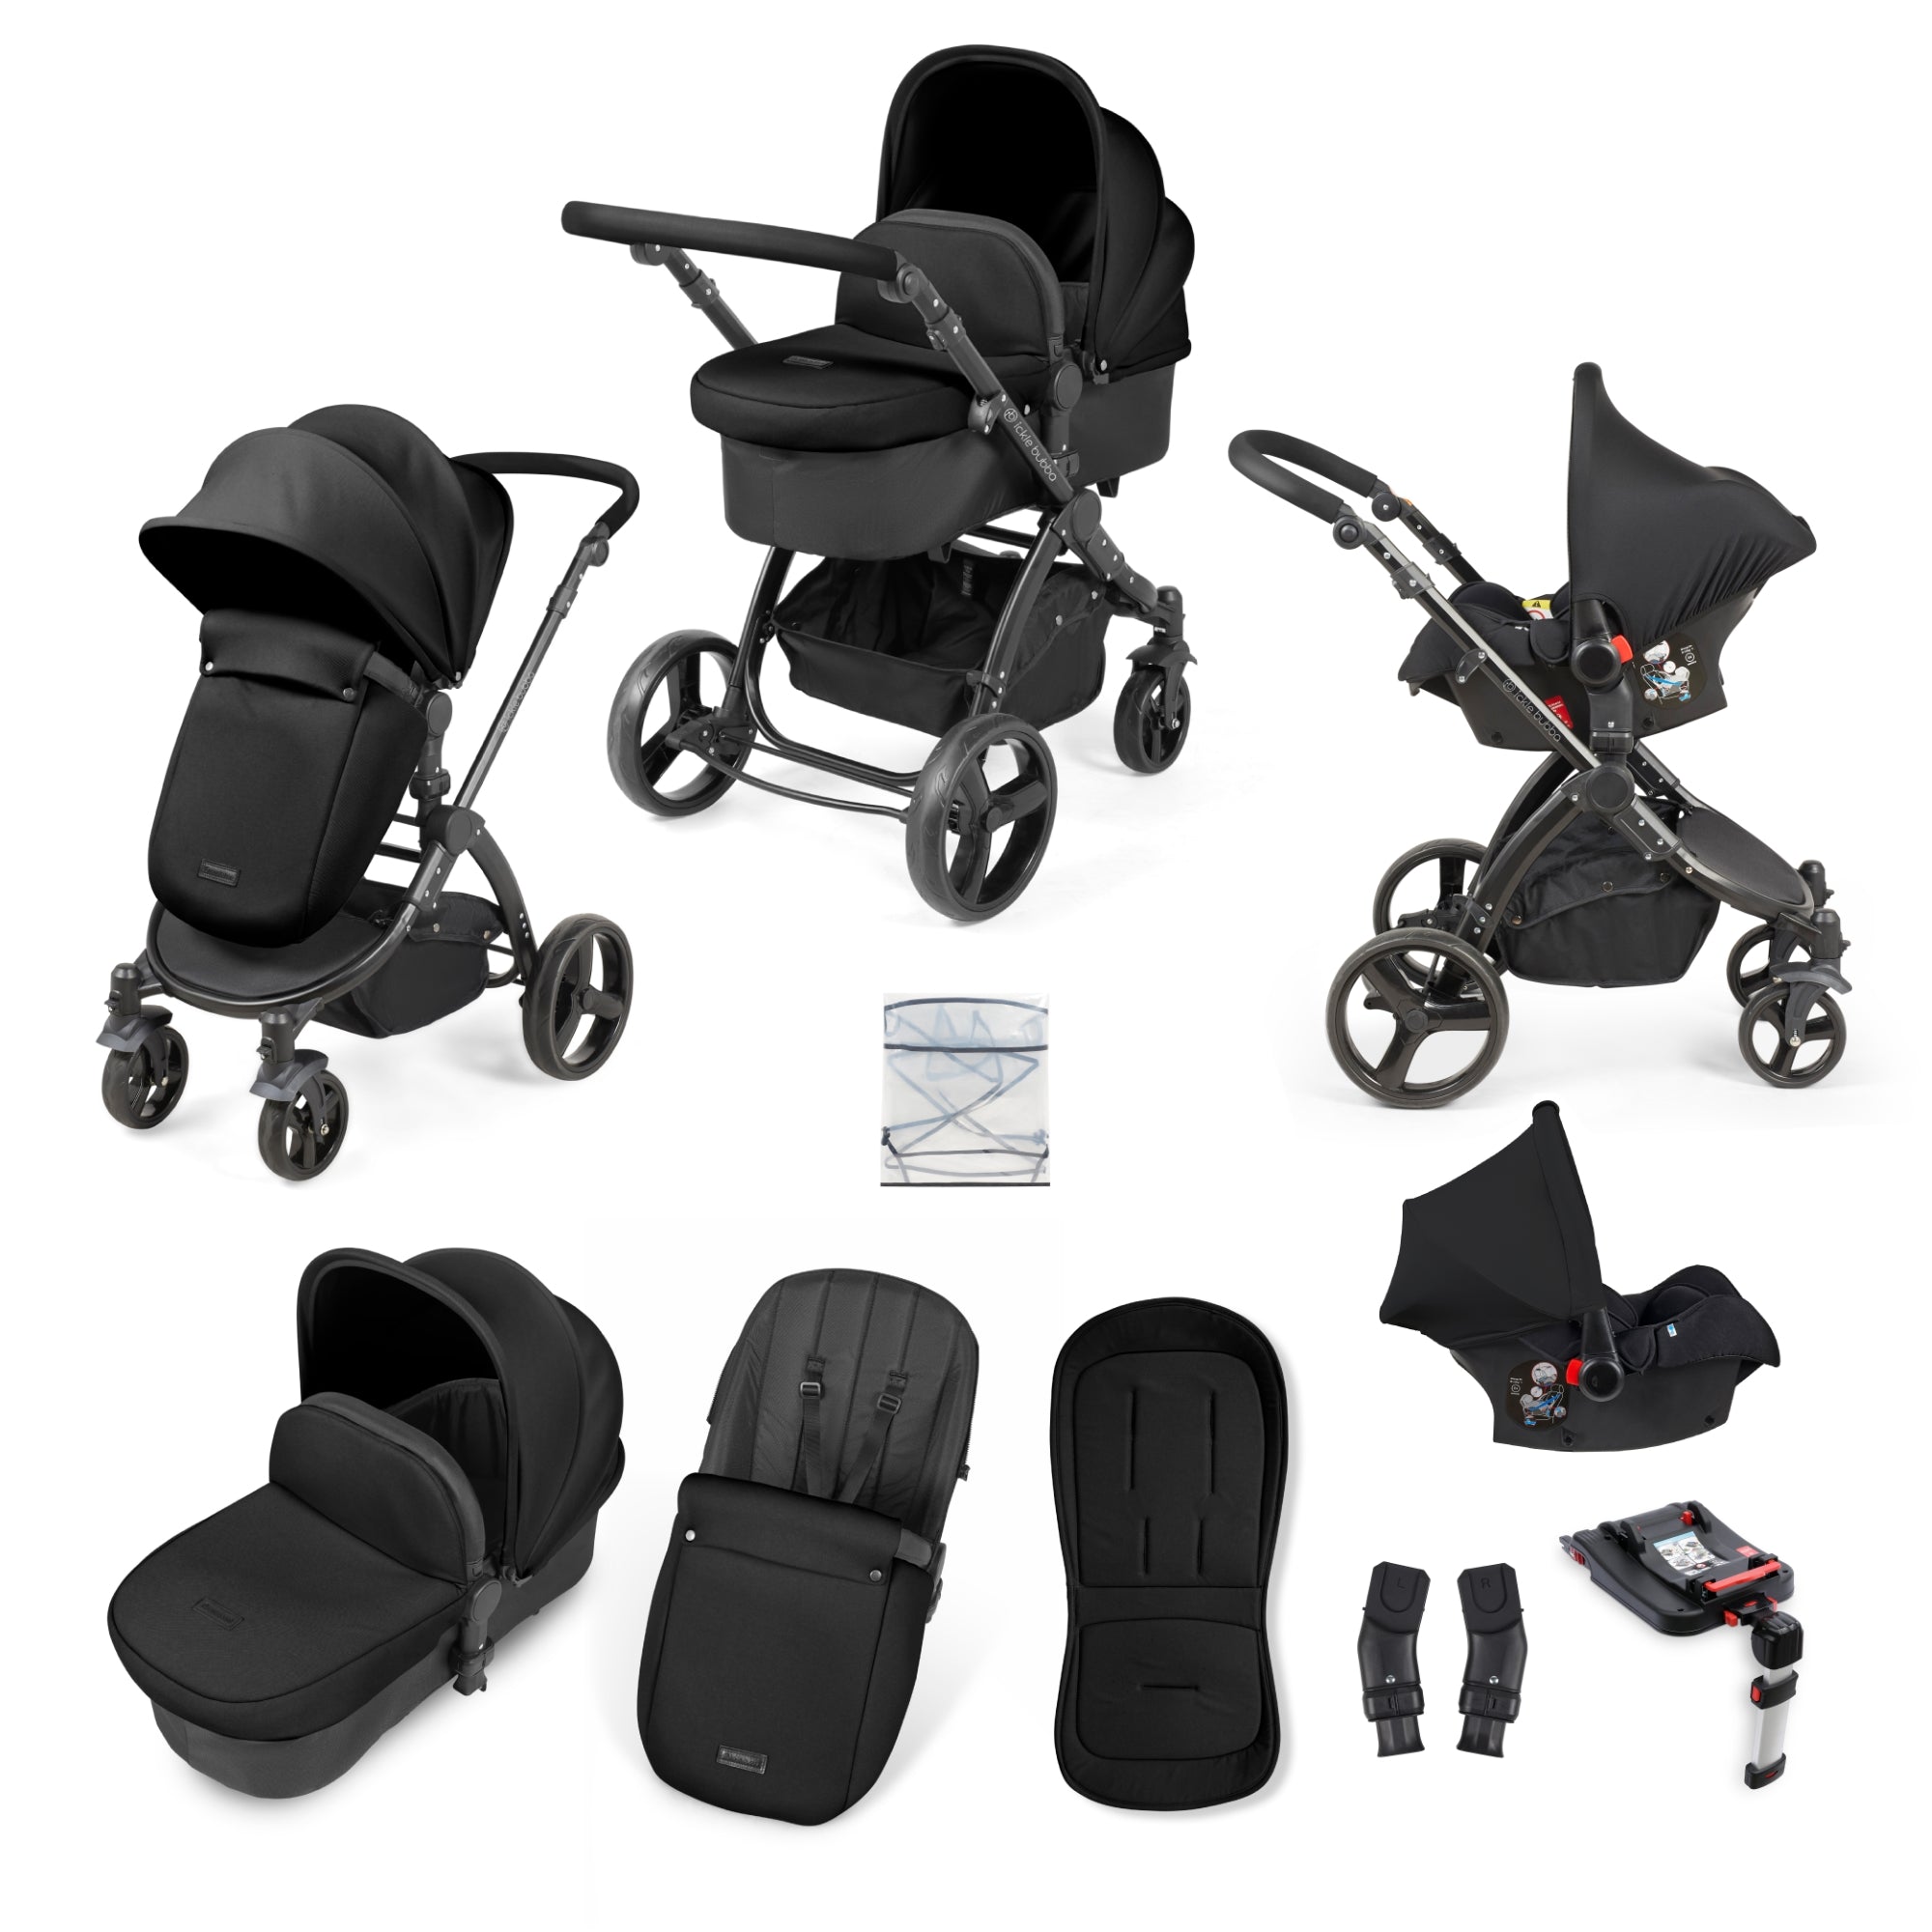 Stomp Urban 3 in 1 Travel System & ISOFIX Base